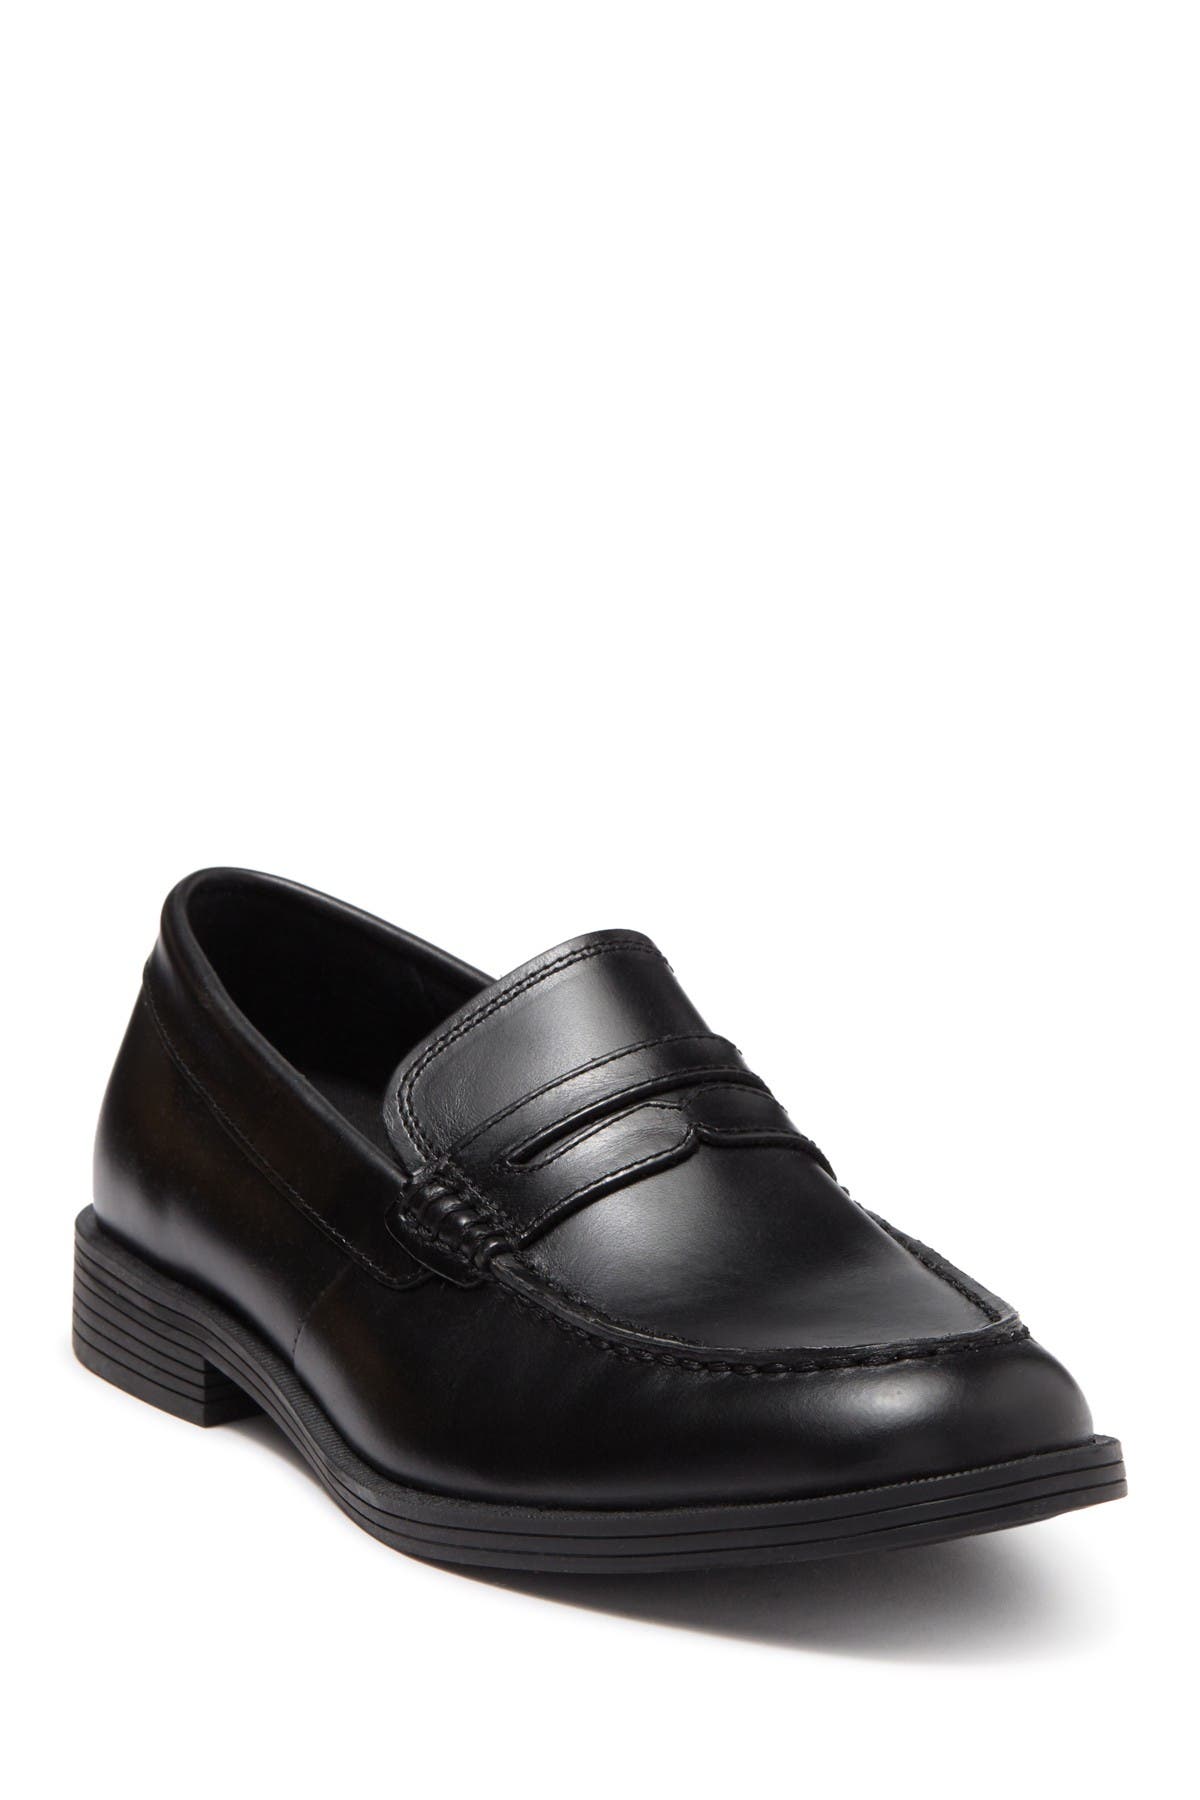 sperry black penny loafers